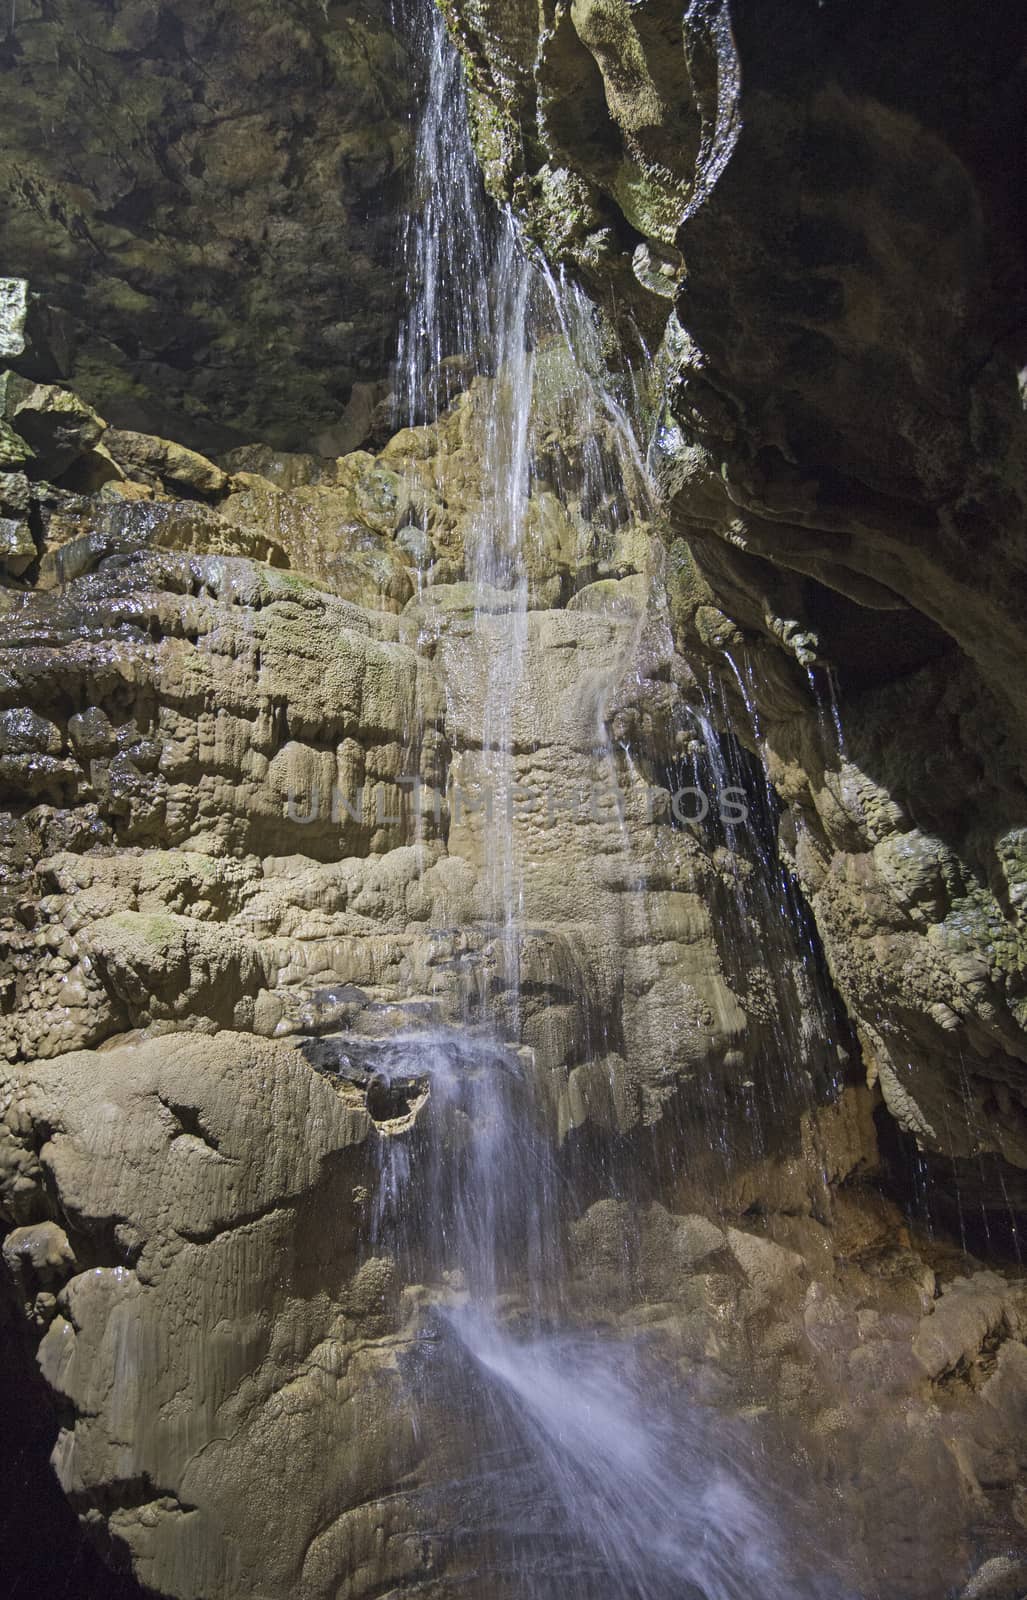 Closeup detail of geological rock formations in underground subterranean limestone cave cavern with waterfall